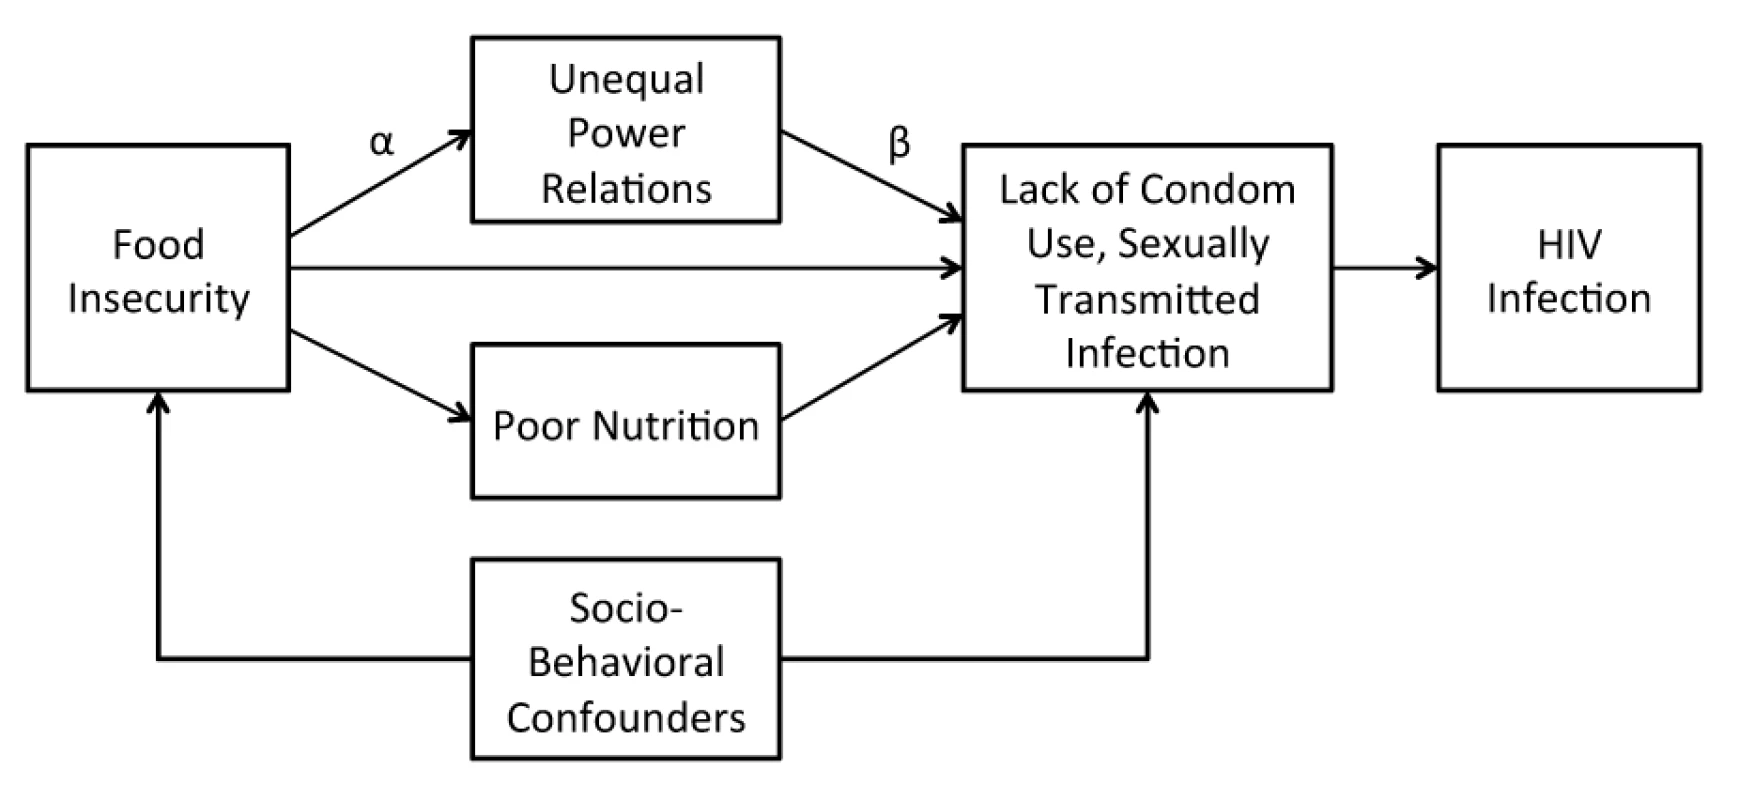 Conceptual framework linking food insecurity to HIV risk.